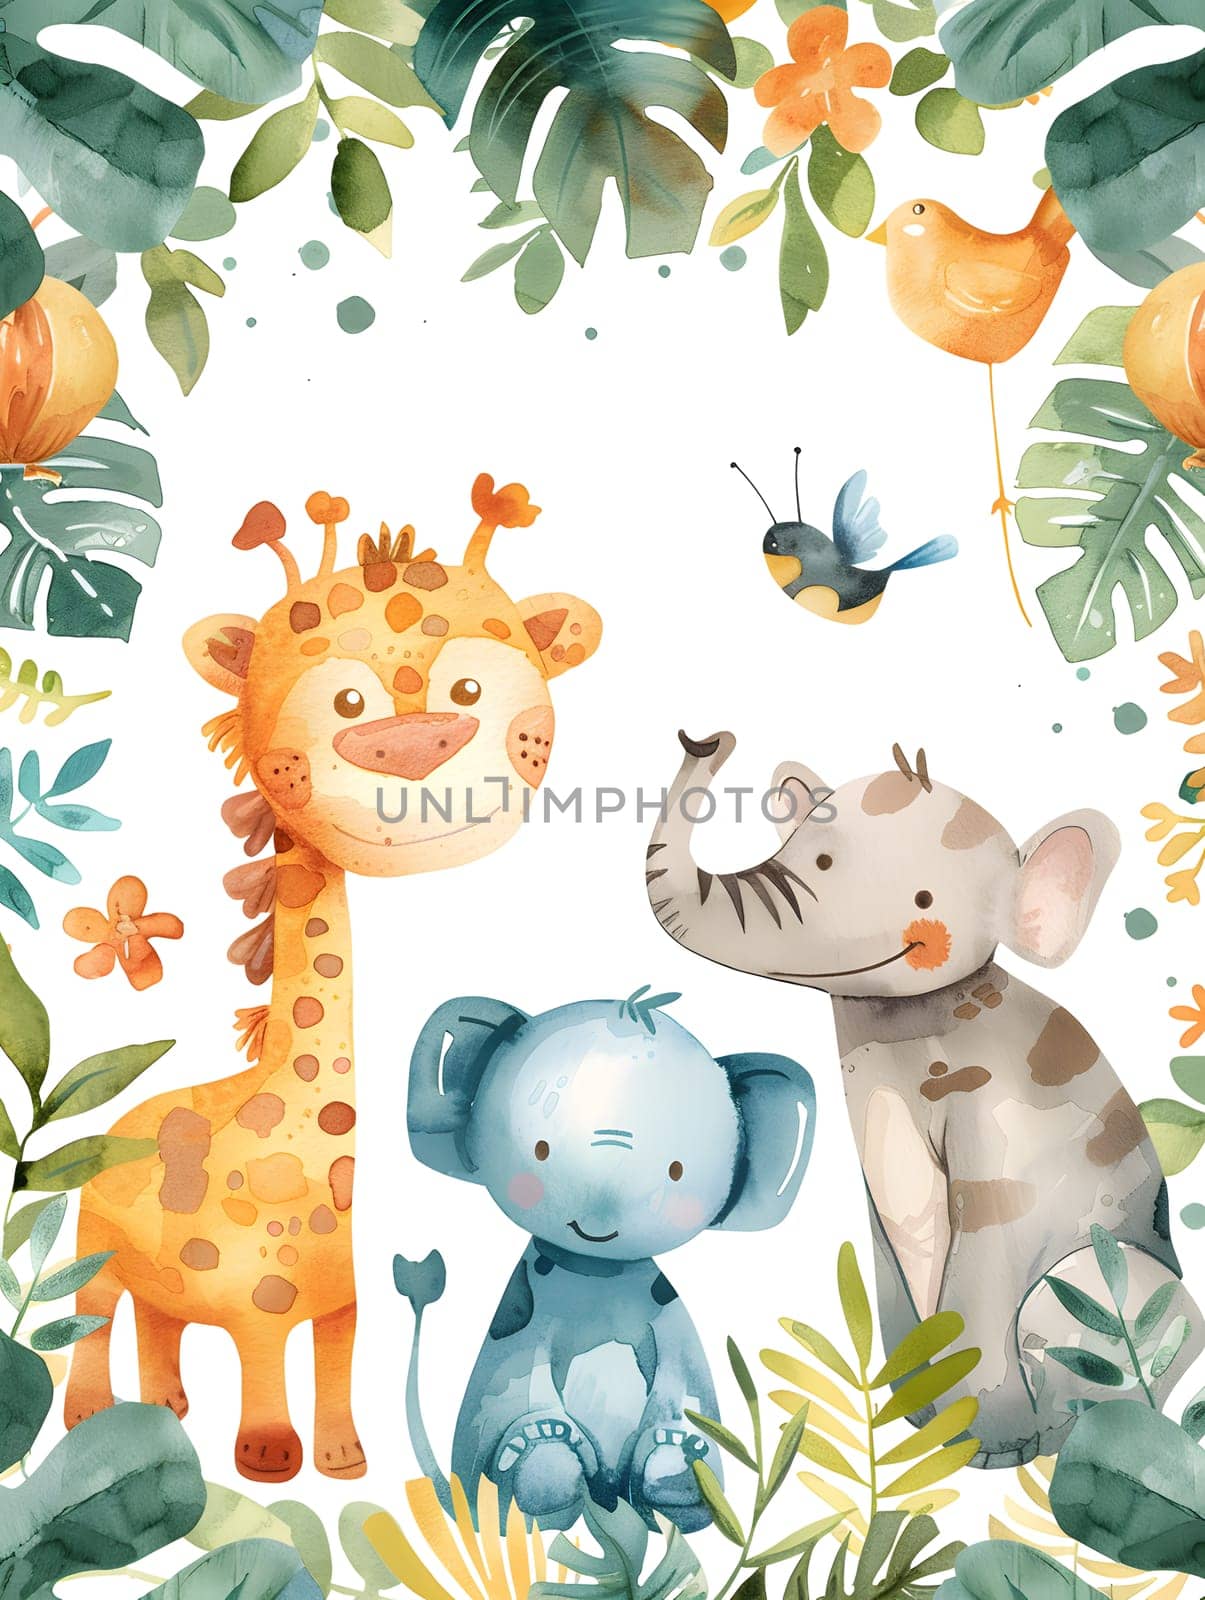 An artistic scene in the jungle a giraffe, elephant, and baby elephant sitting together, surrounded by colorful plants and smiling. A creative arts illustration